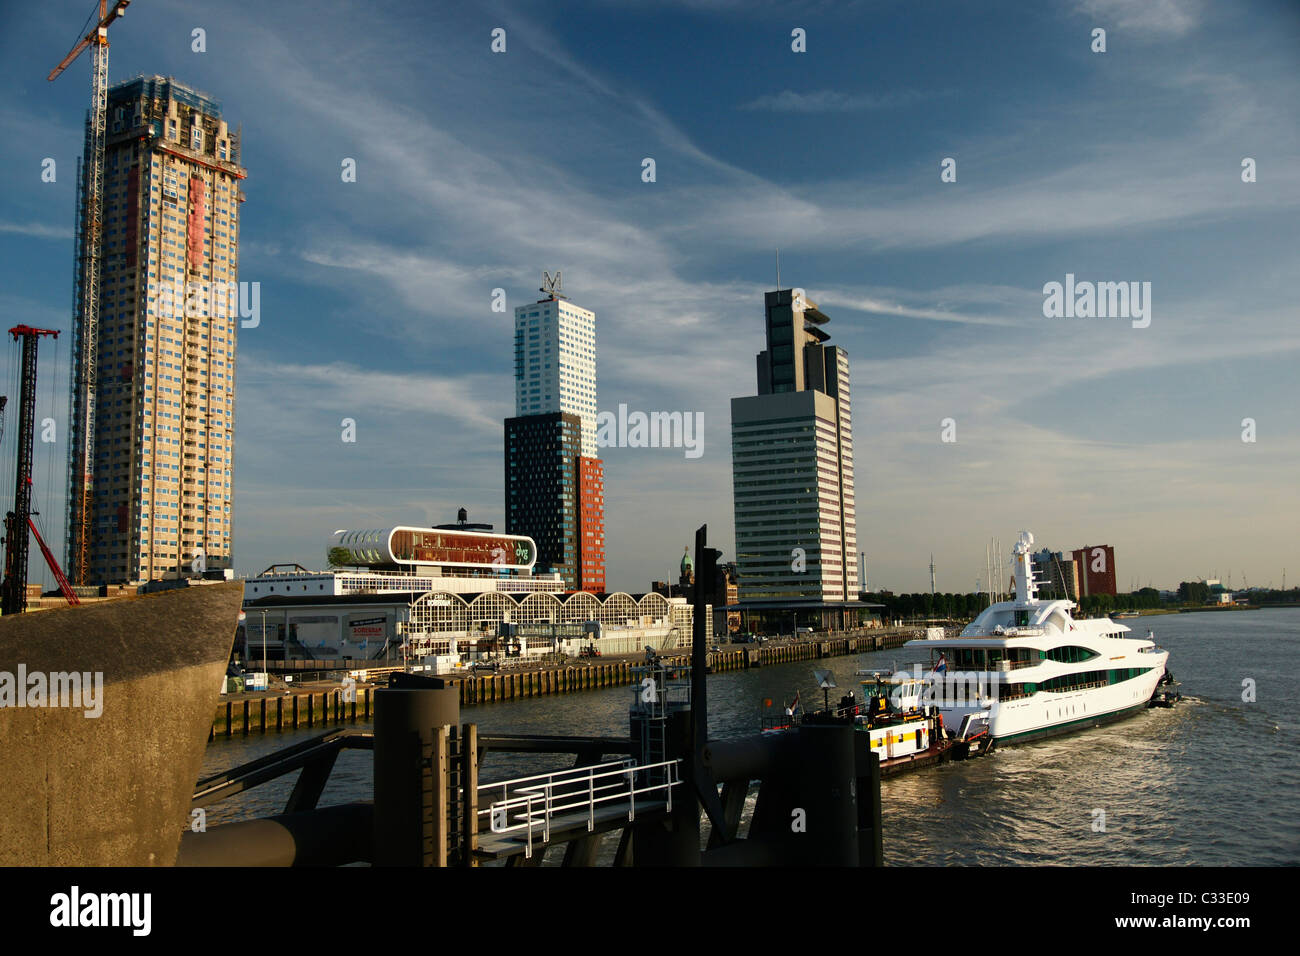 Katendrecht district in Rotterdam Netherlands skyline with skyscrapers tall buildings modern urban architecture under blue sky Stock Photo